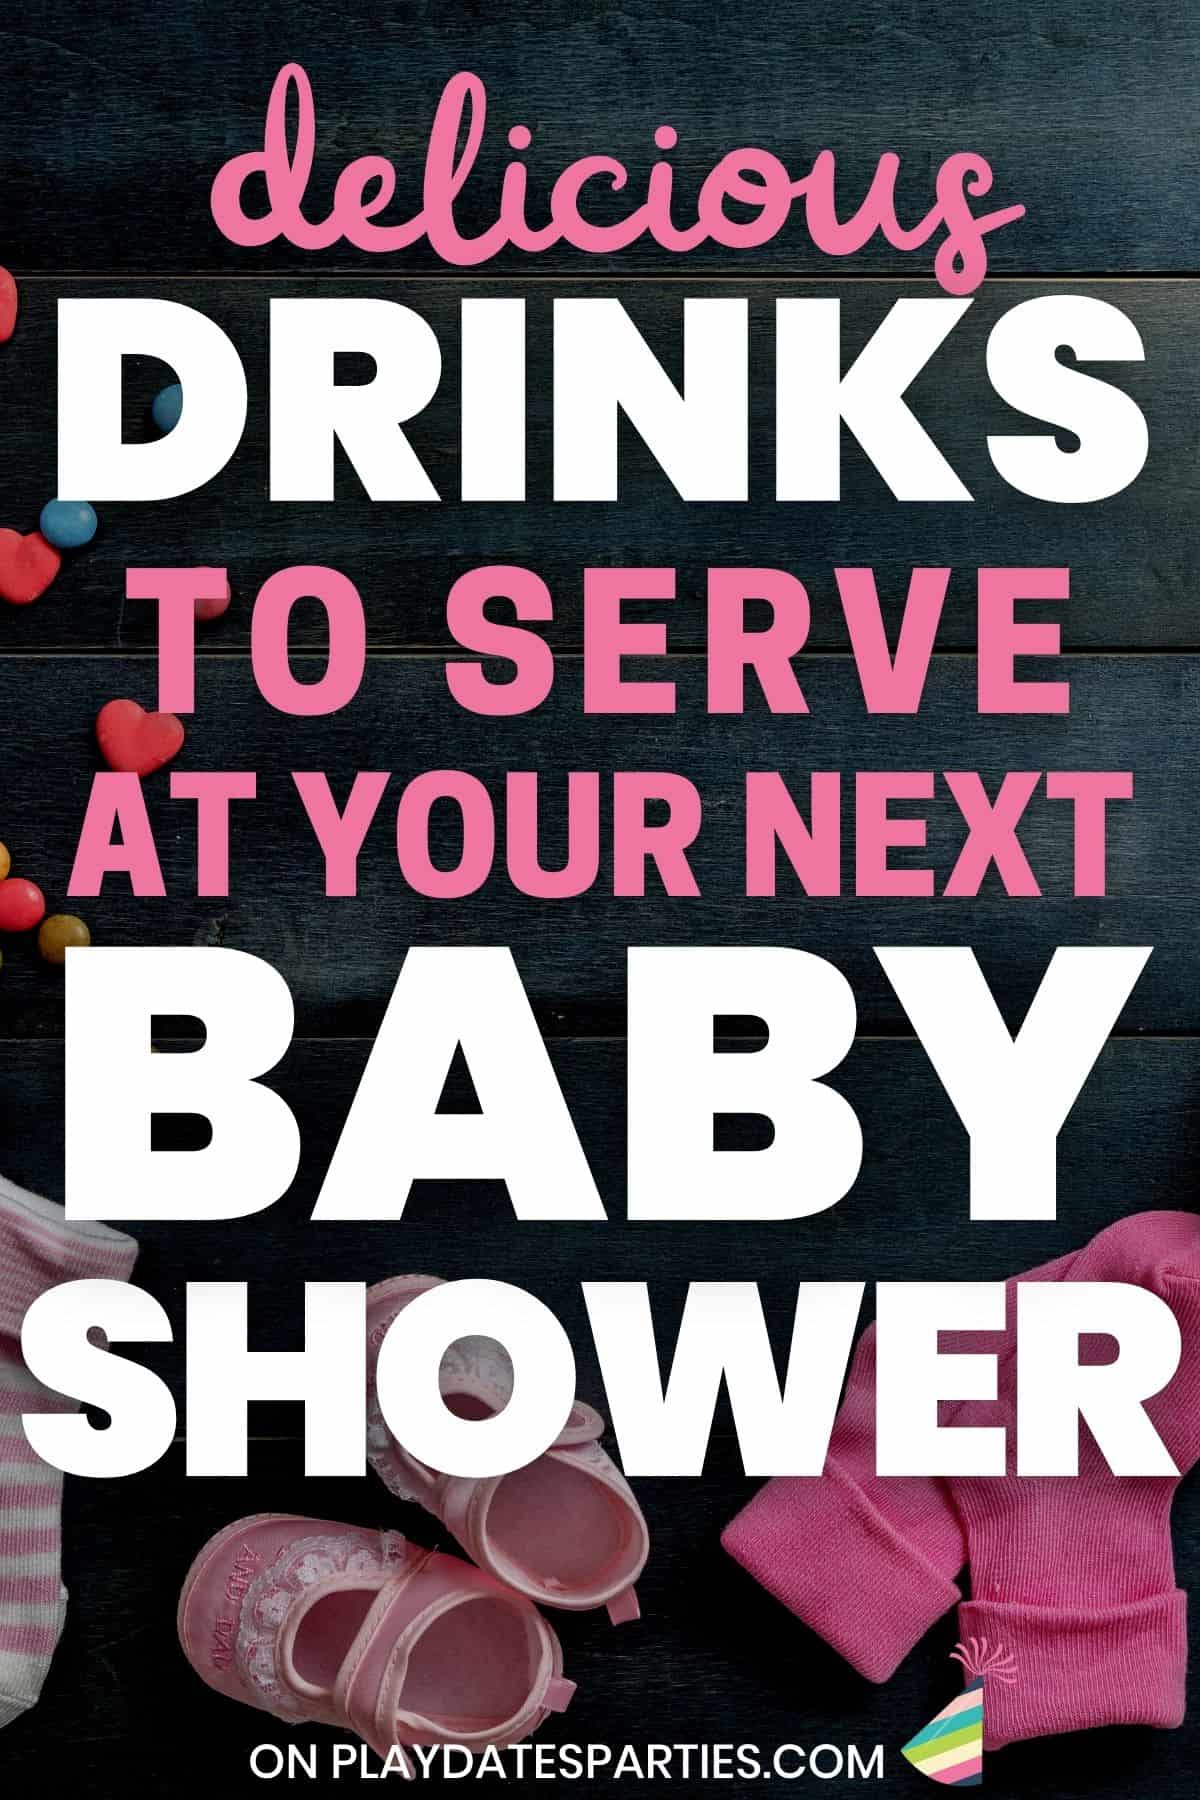 Baby socks and shoes on a dark surface with text delicious drinks to serve at your next baby shower.